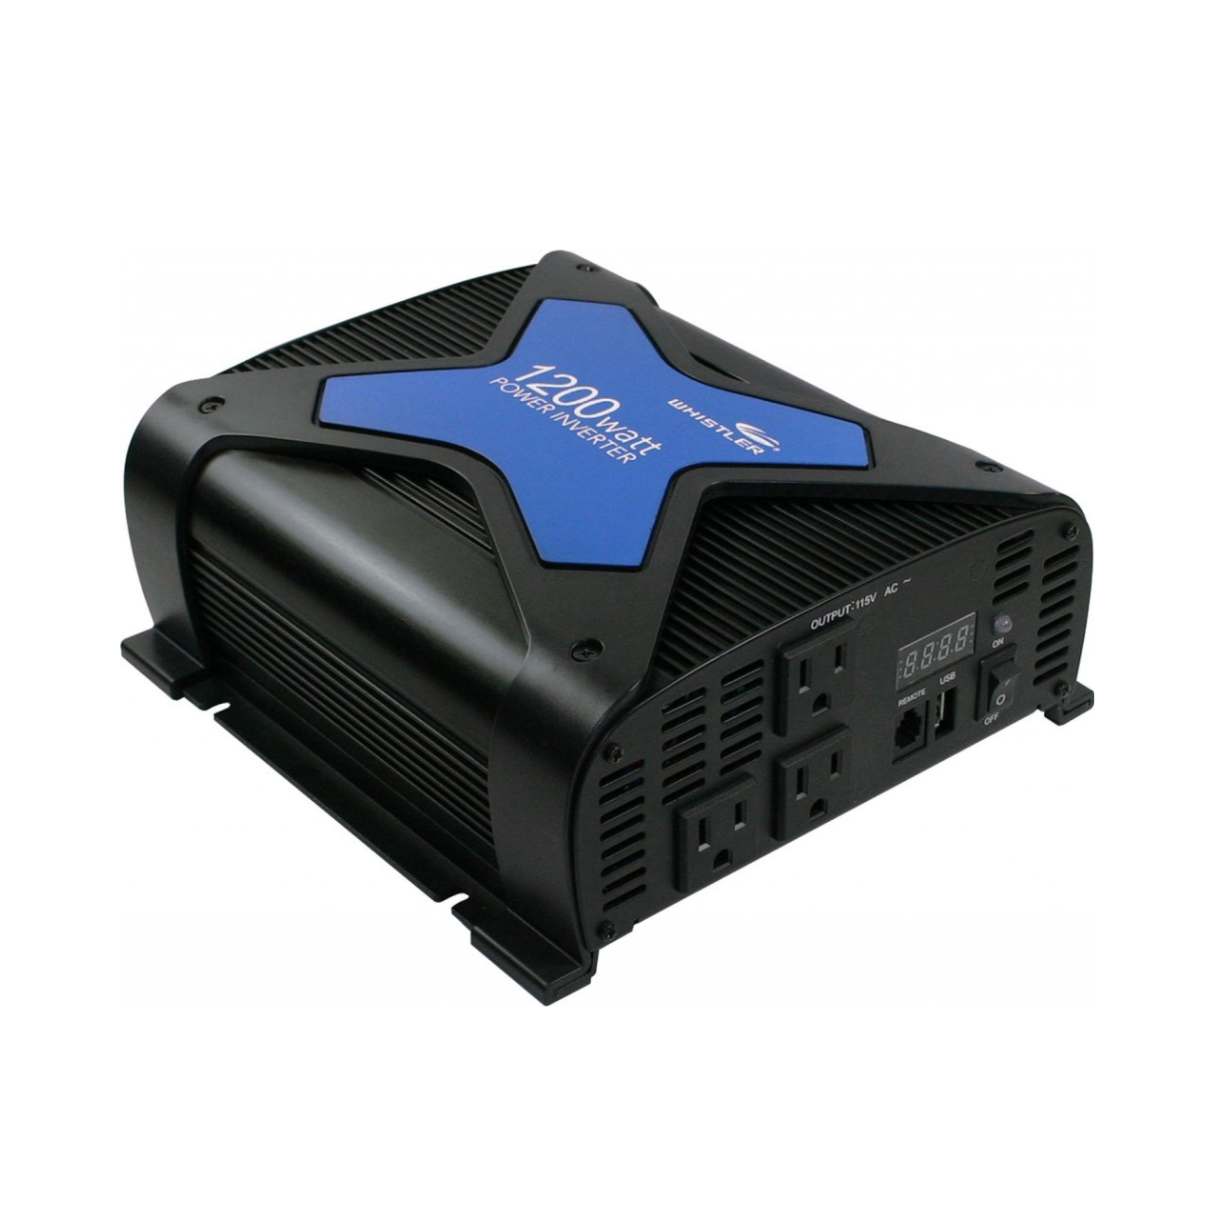 What Is The Ideal Inverter Size For Power Tools